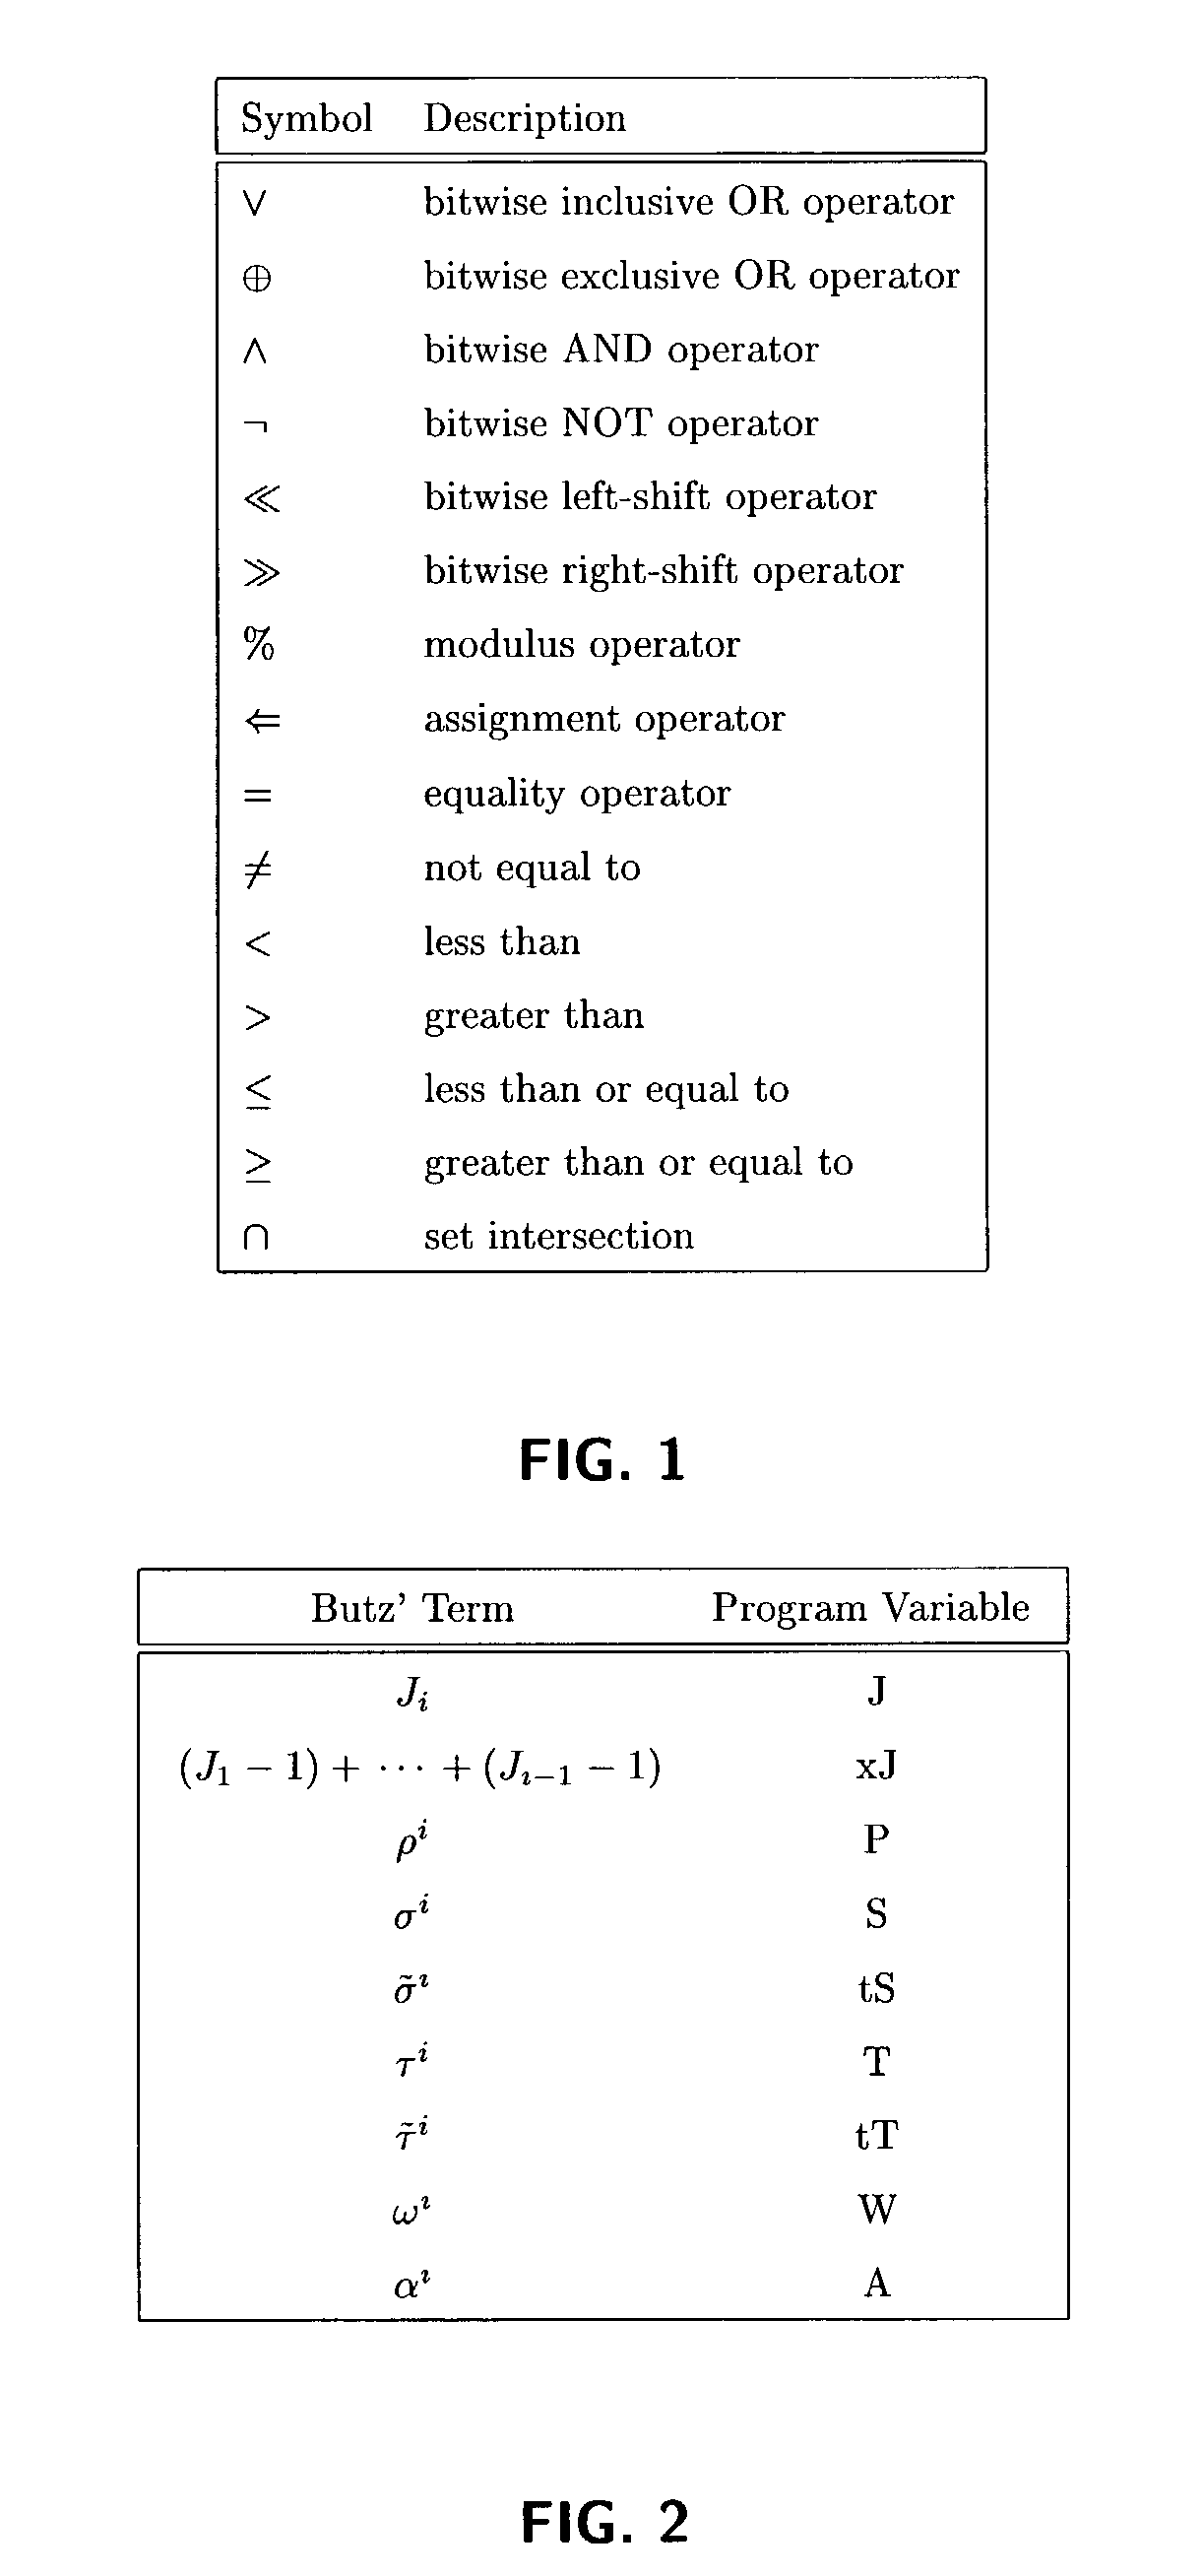 Method of storing and retrieving multi-dimensional data using the hilbert curve